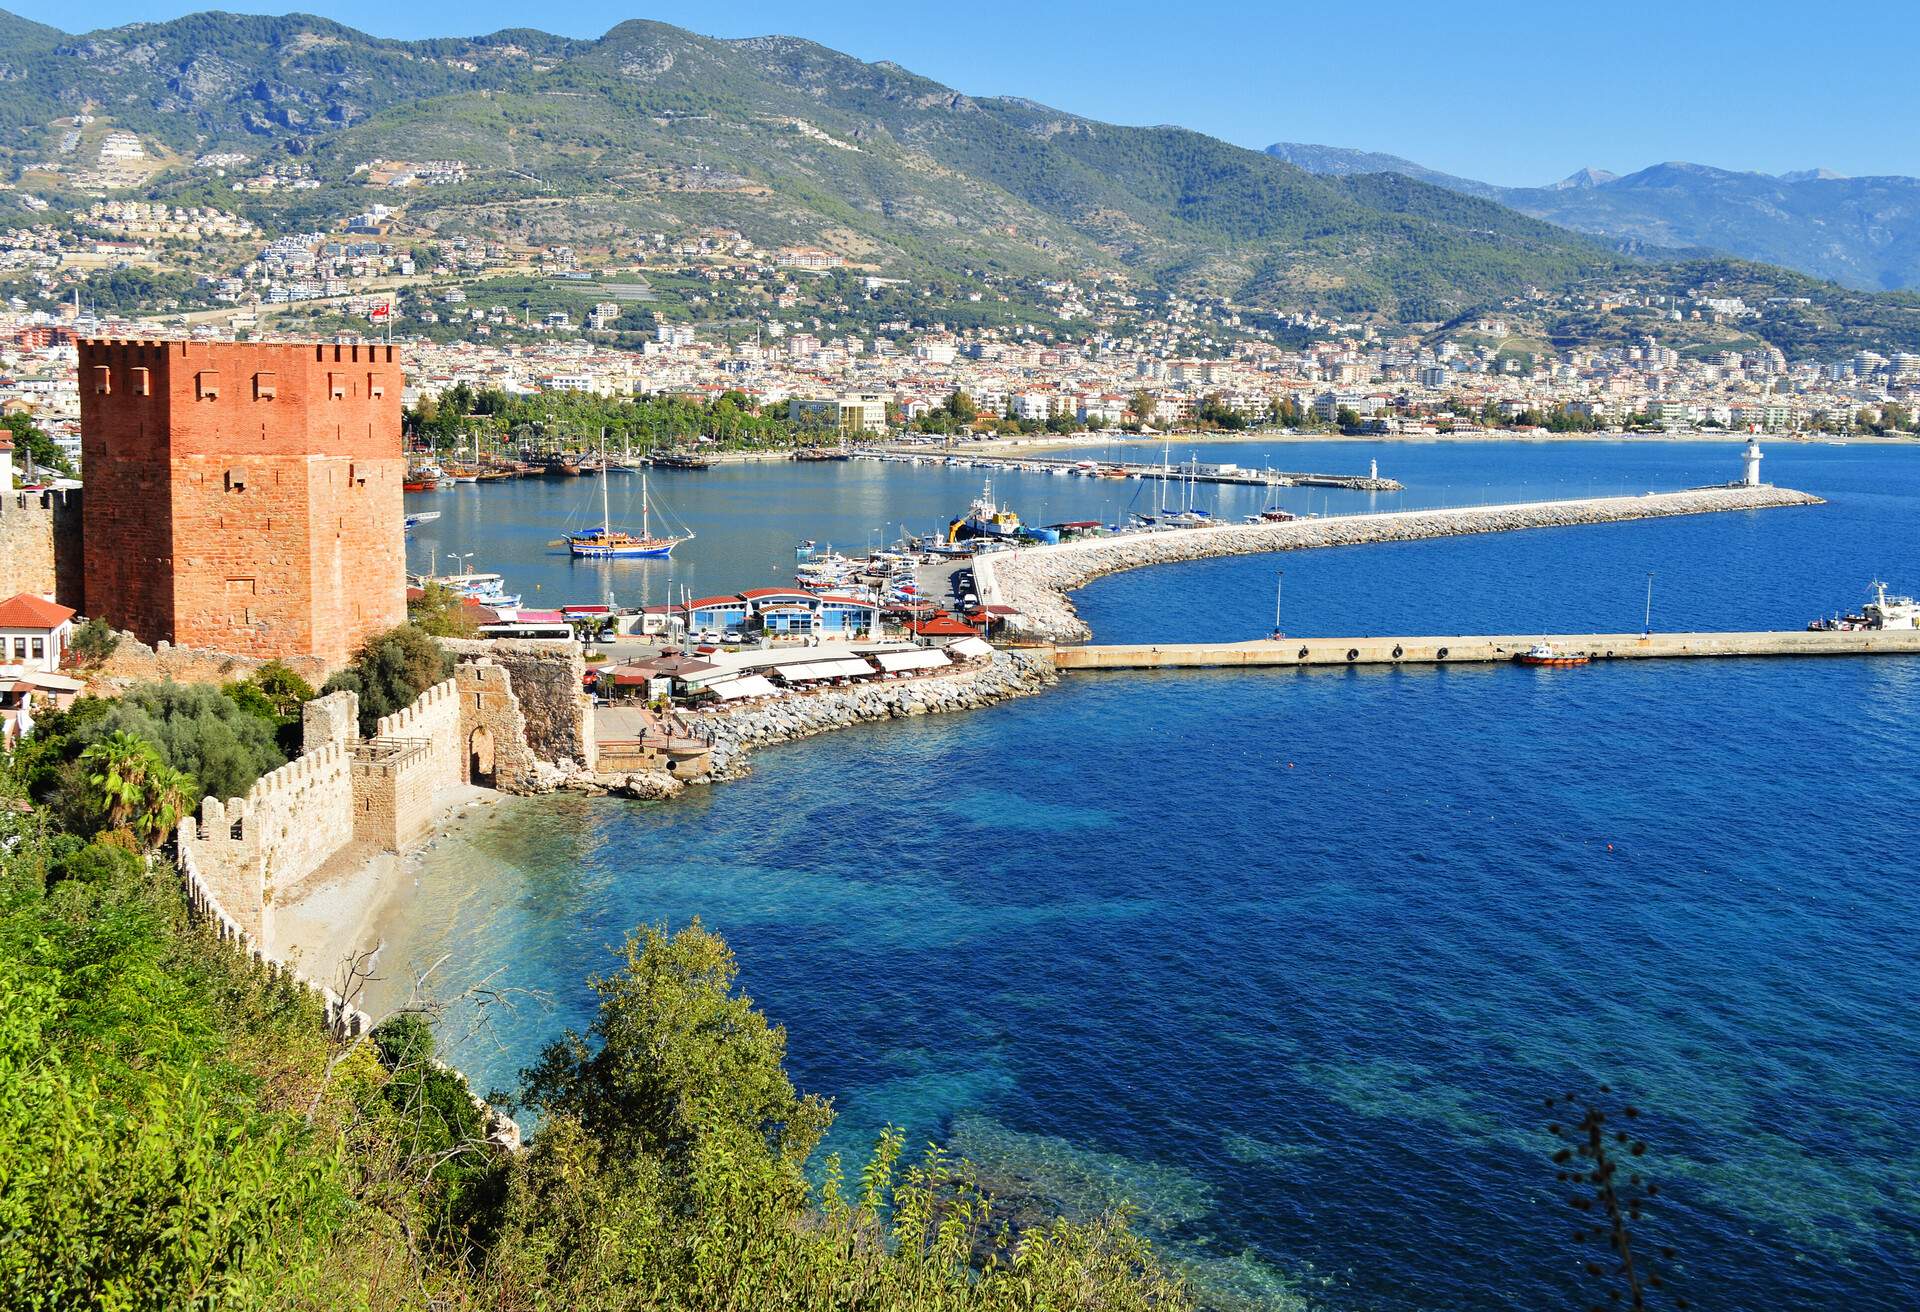 View of Alanya harbor form Alanya peninsula. Turkish Riviera; Shutterstock ID 229550143; Purchase Order: SF-06928905; Job: ; Client/Licensee: ; Other: